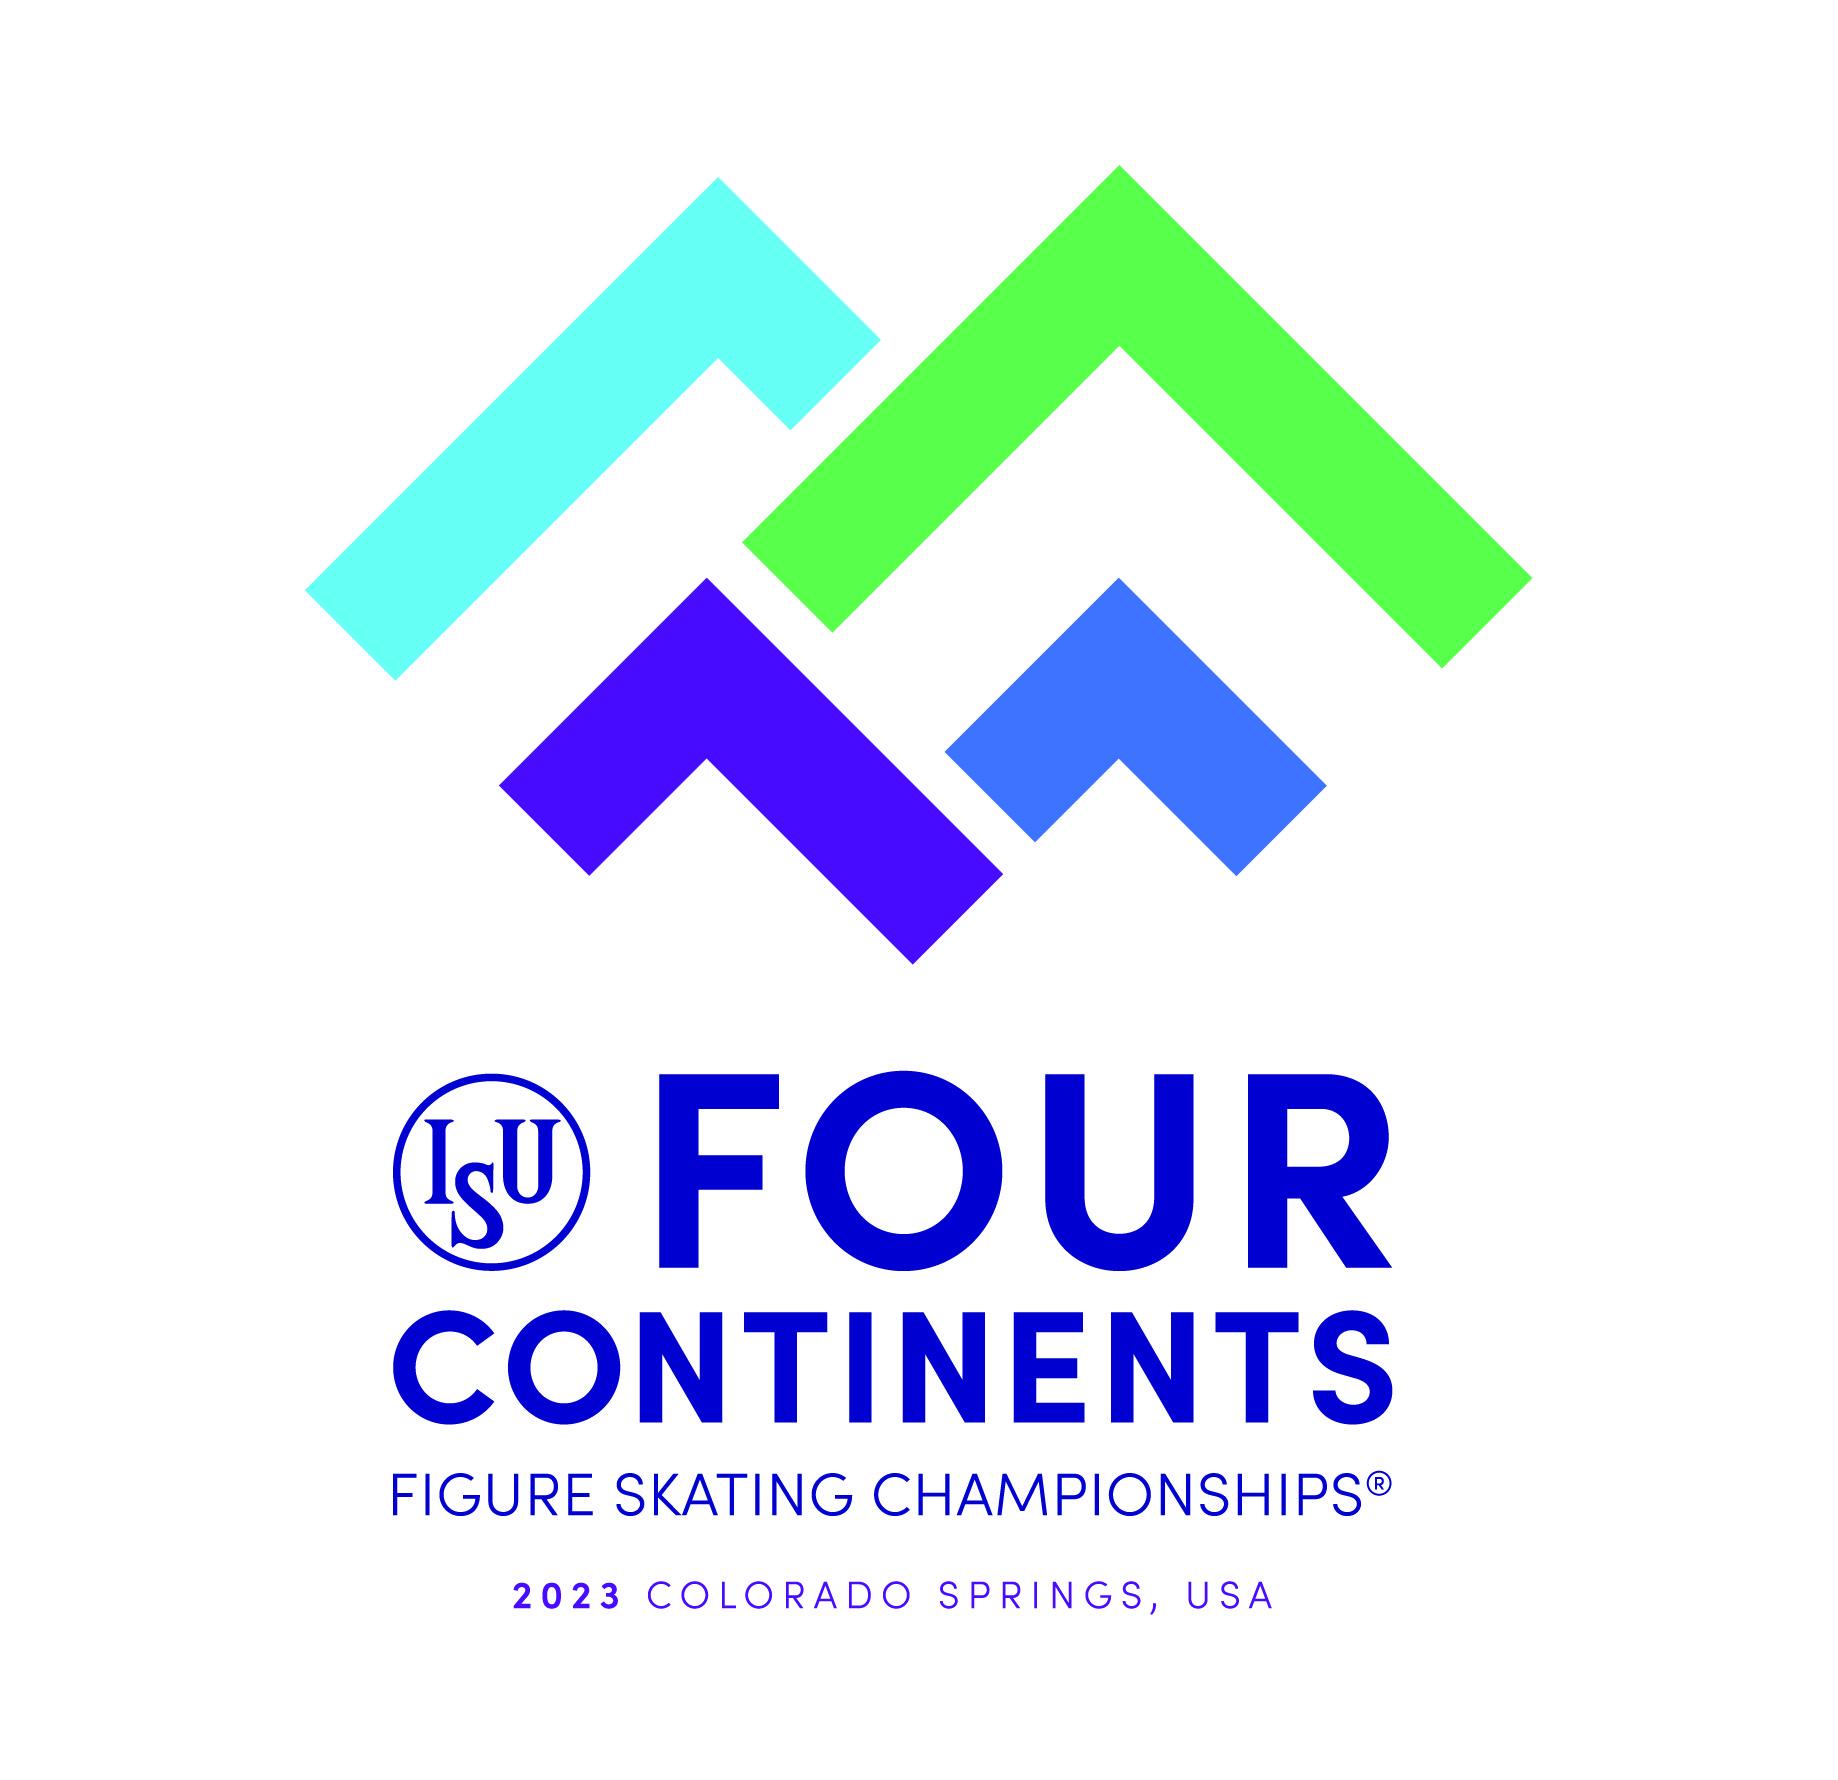 2023 FourContinents Logo fullcolor